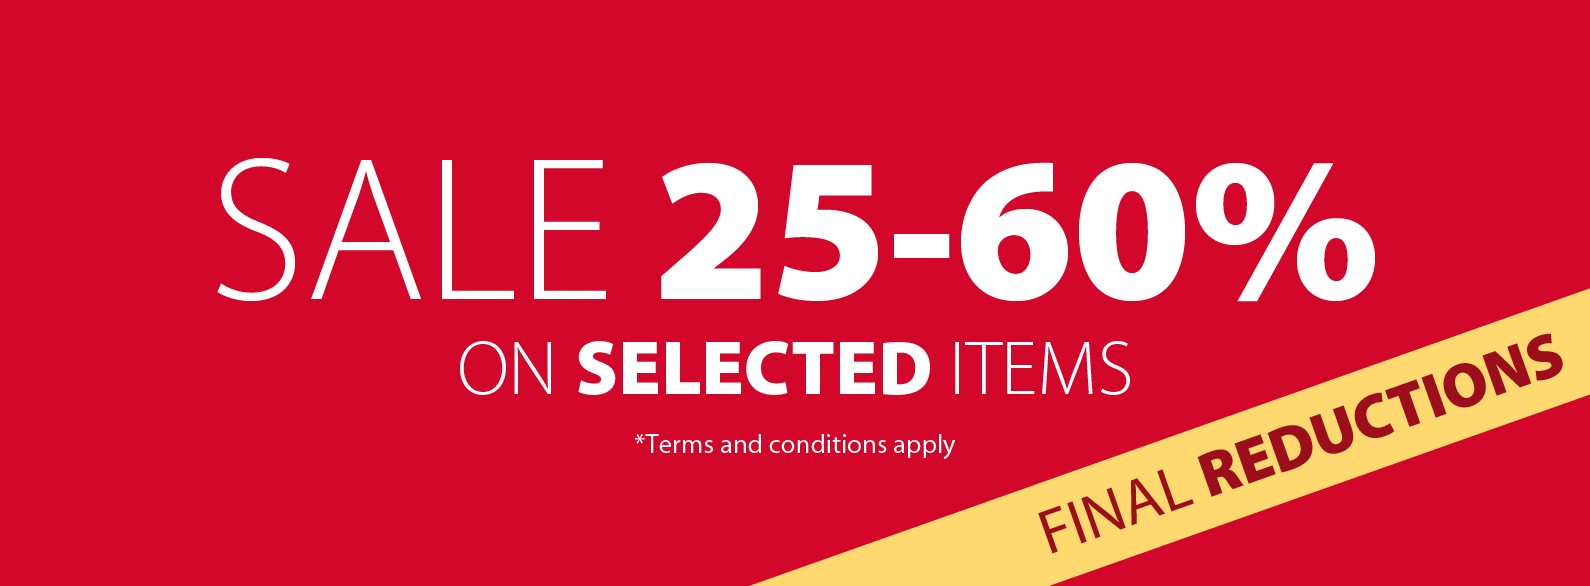 Sale 25-60% final reductions on selected items